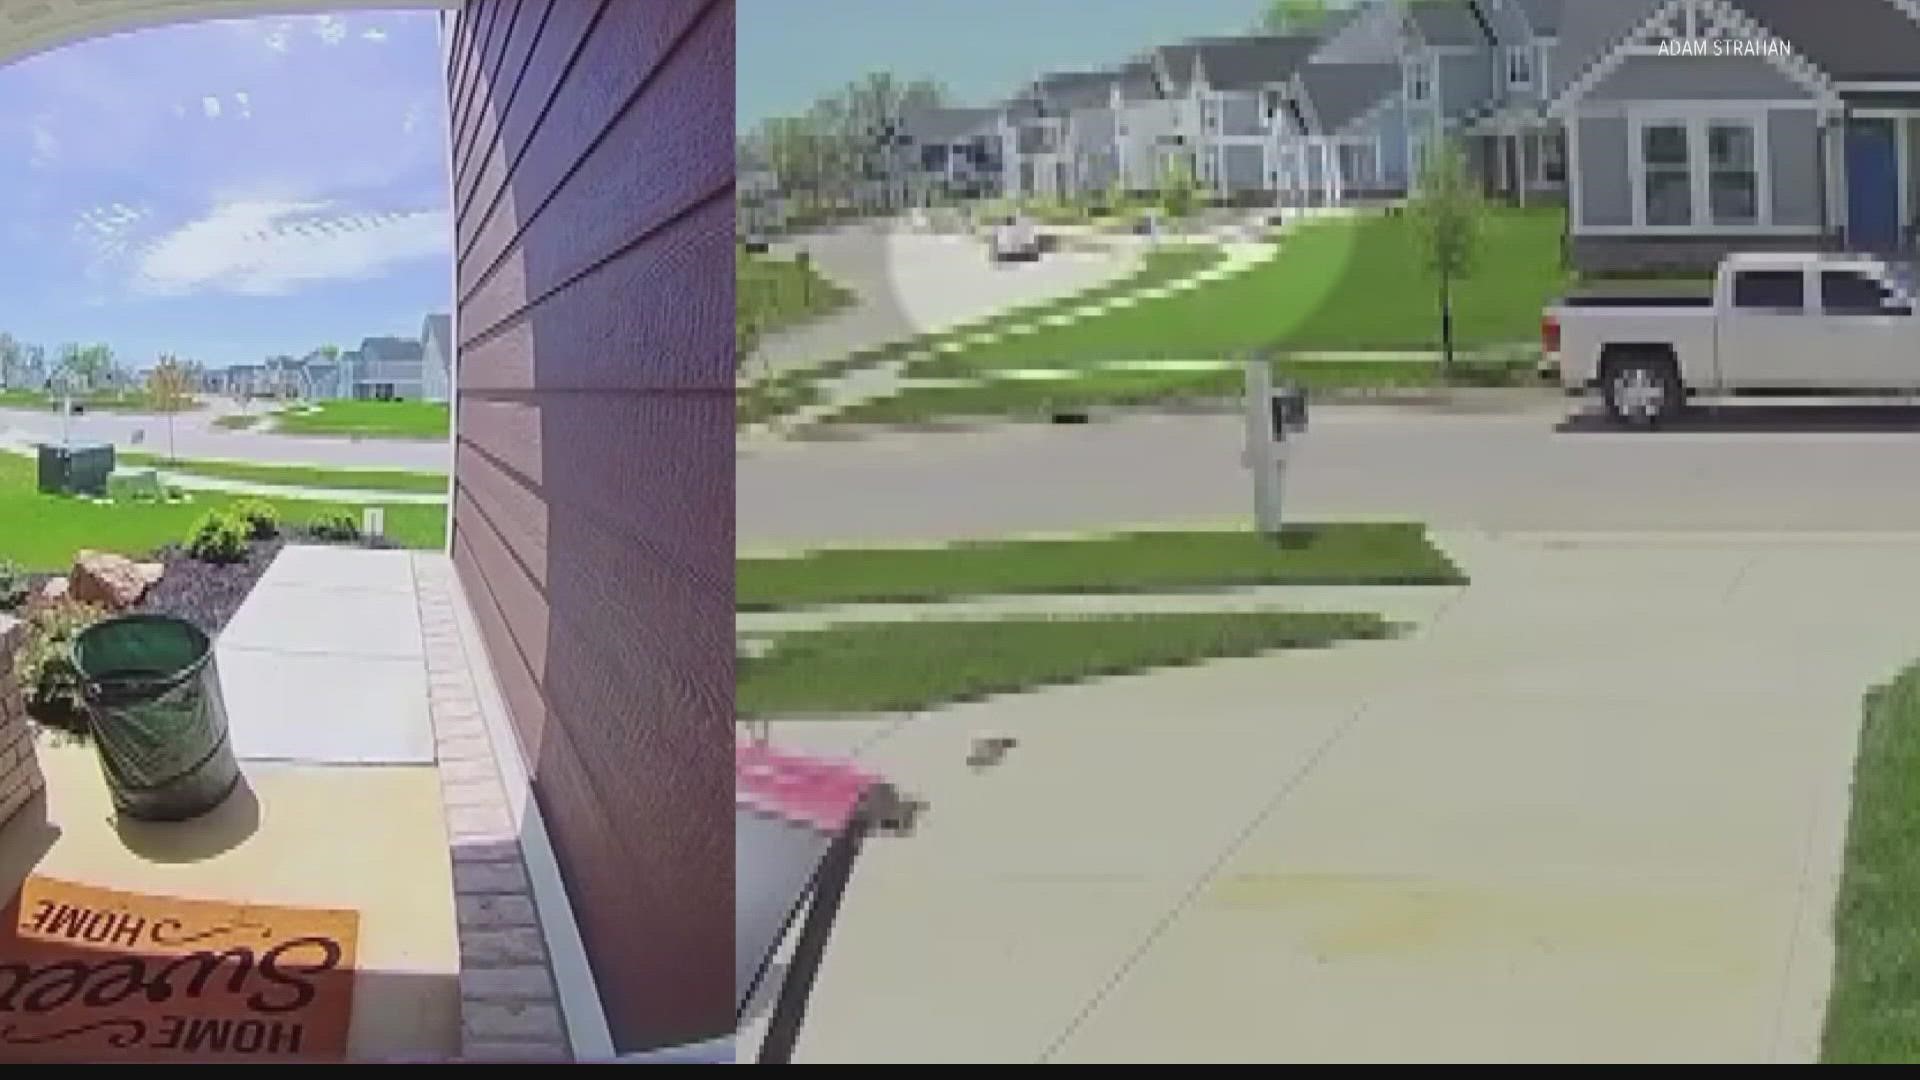 The chaos was captured on security cameras:
A gun battle in broad daylight, a neighbor shot in the face and a suspect still on the loose.